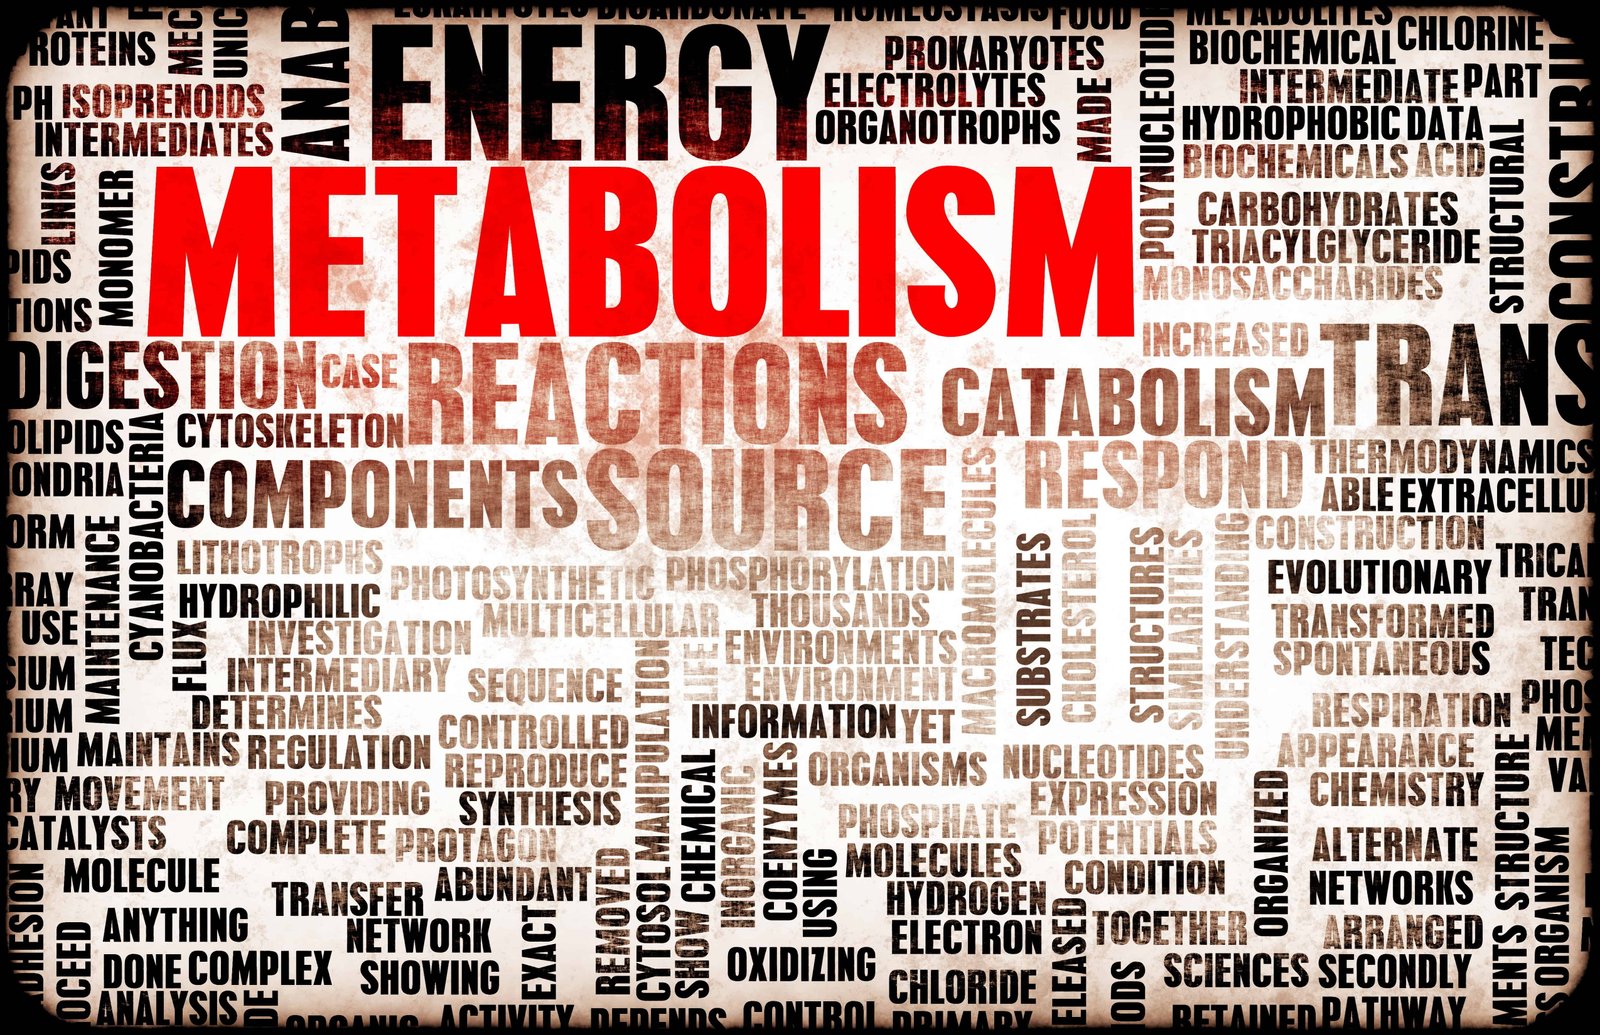 Four Common Mistakes That Slow Your Metabolism